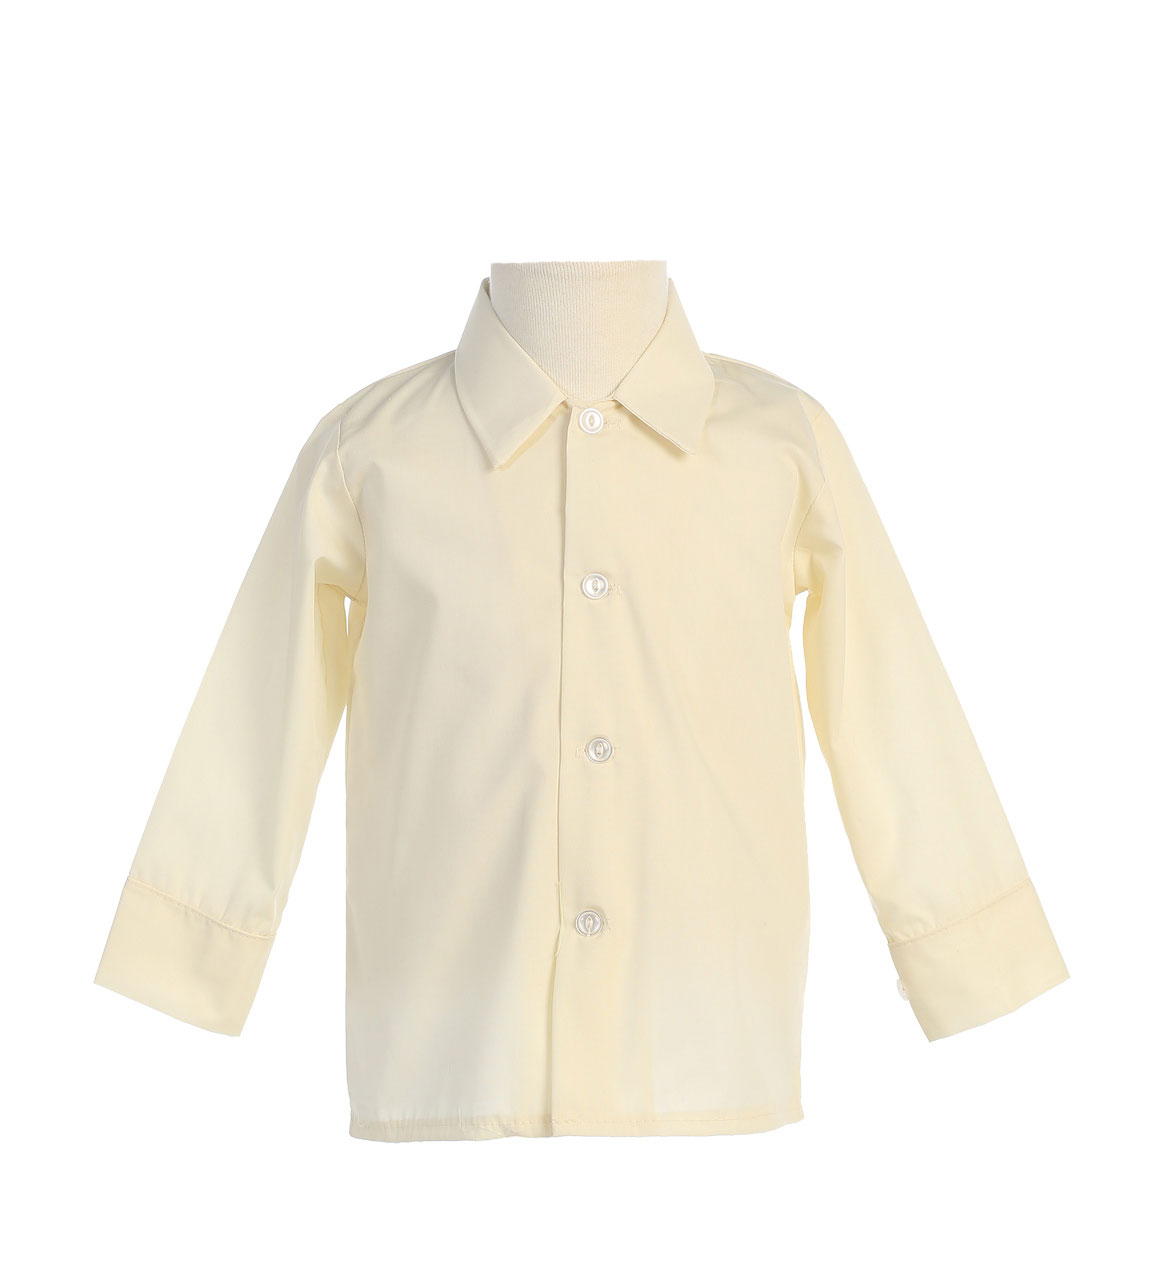 Boys Long Sleeved Simple Dress Shirt - Available in Ivory 5